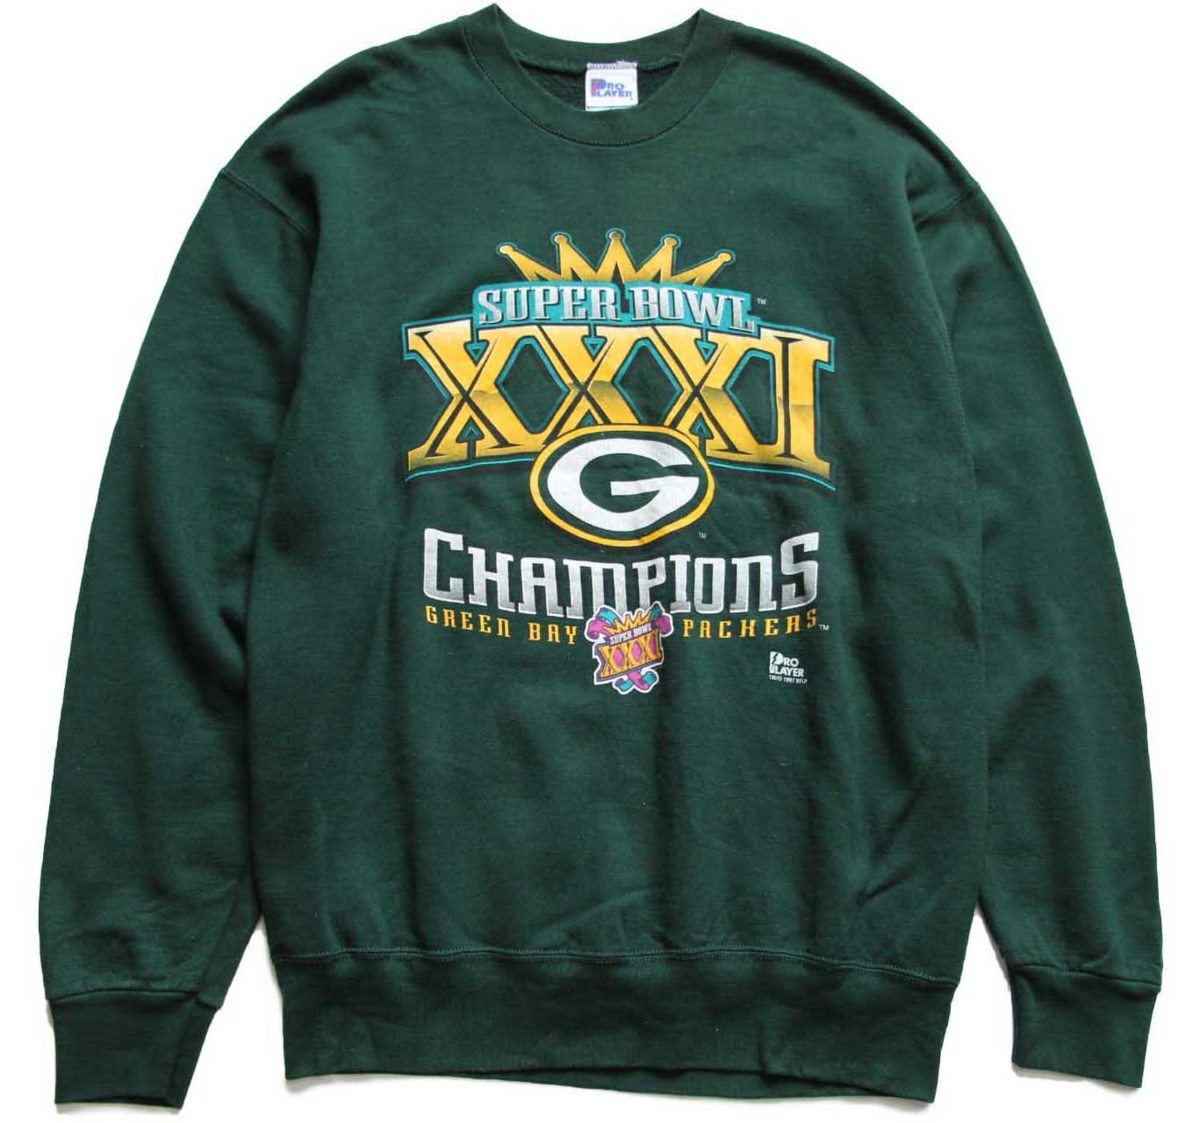 90s USA製 PRO PLAYER NFL GREEN BAY PACKERS スウェット 緑 XL